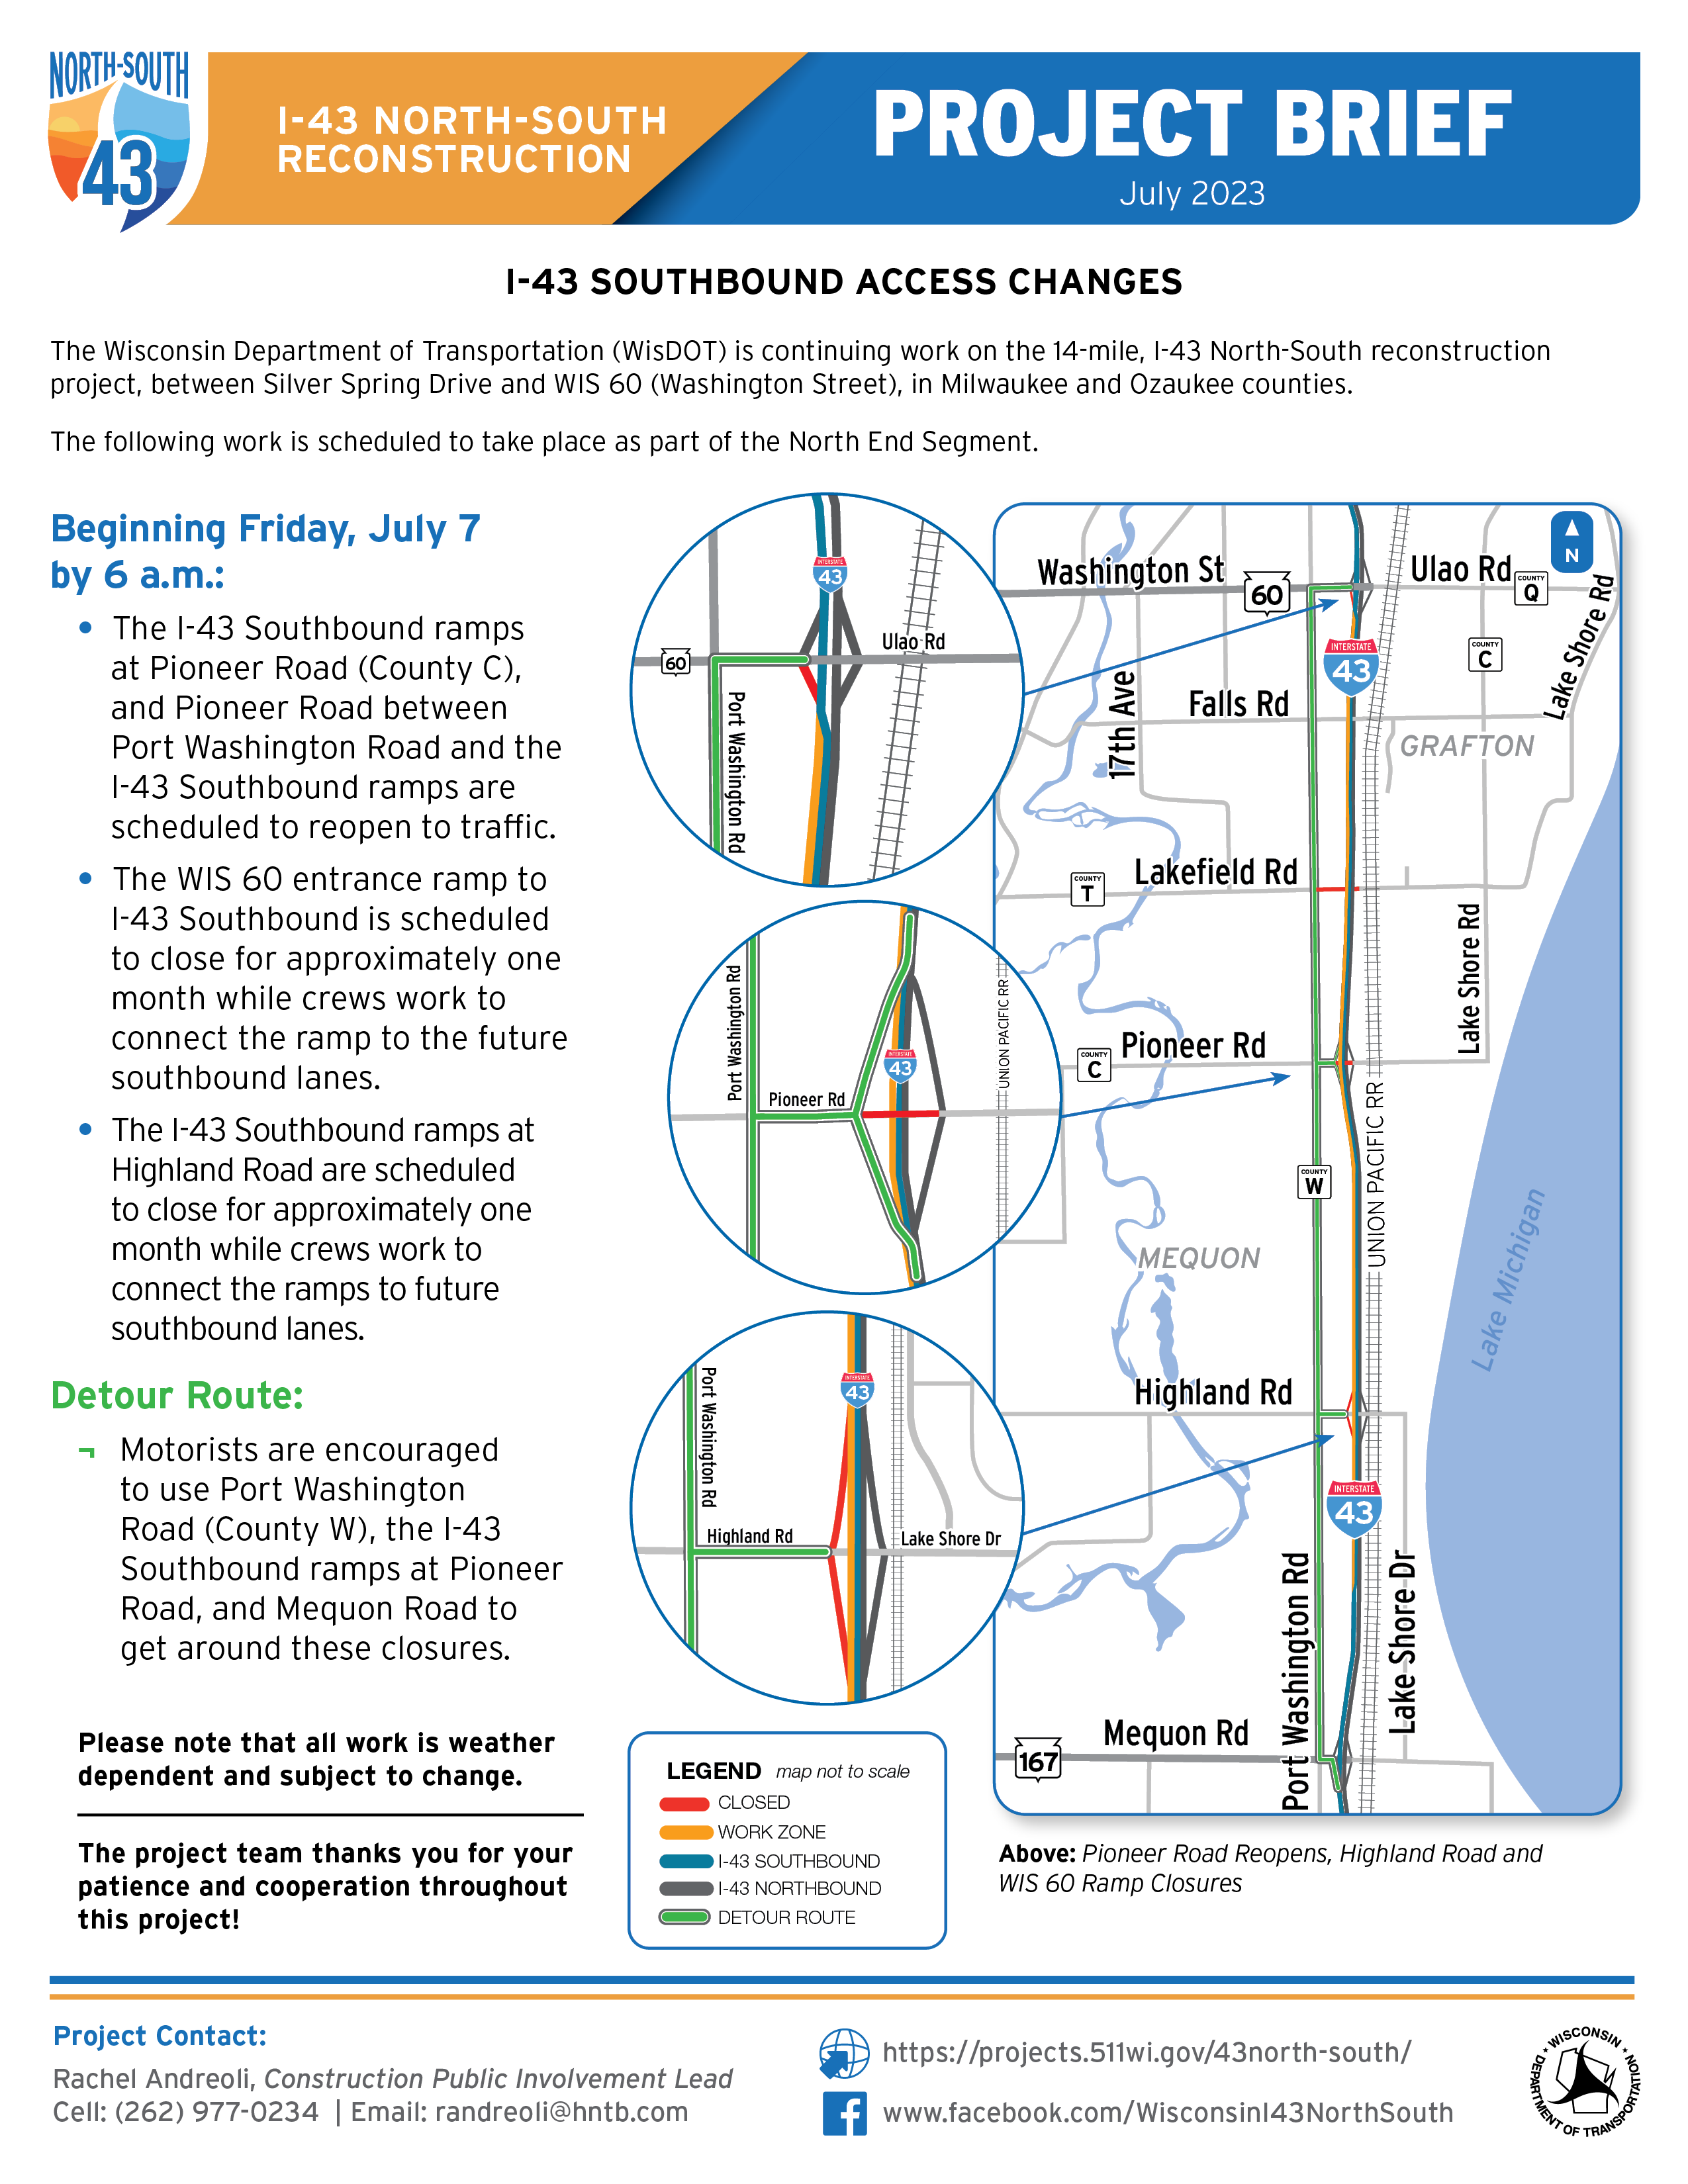 July 7, I-43 Southbound Access Changes